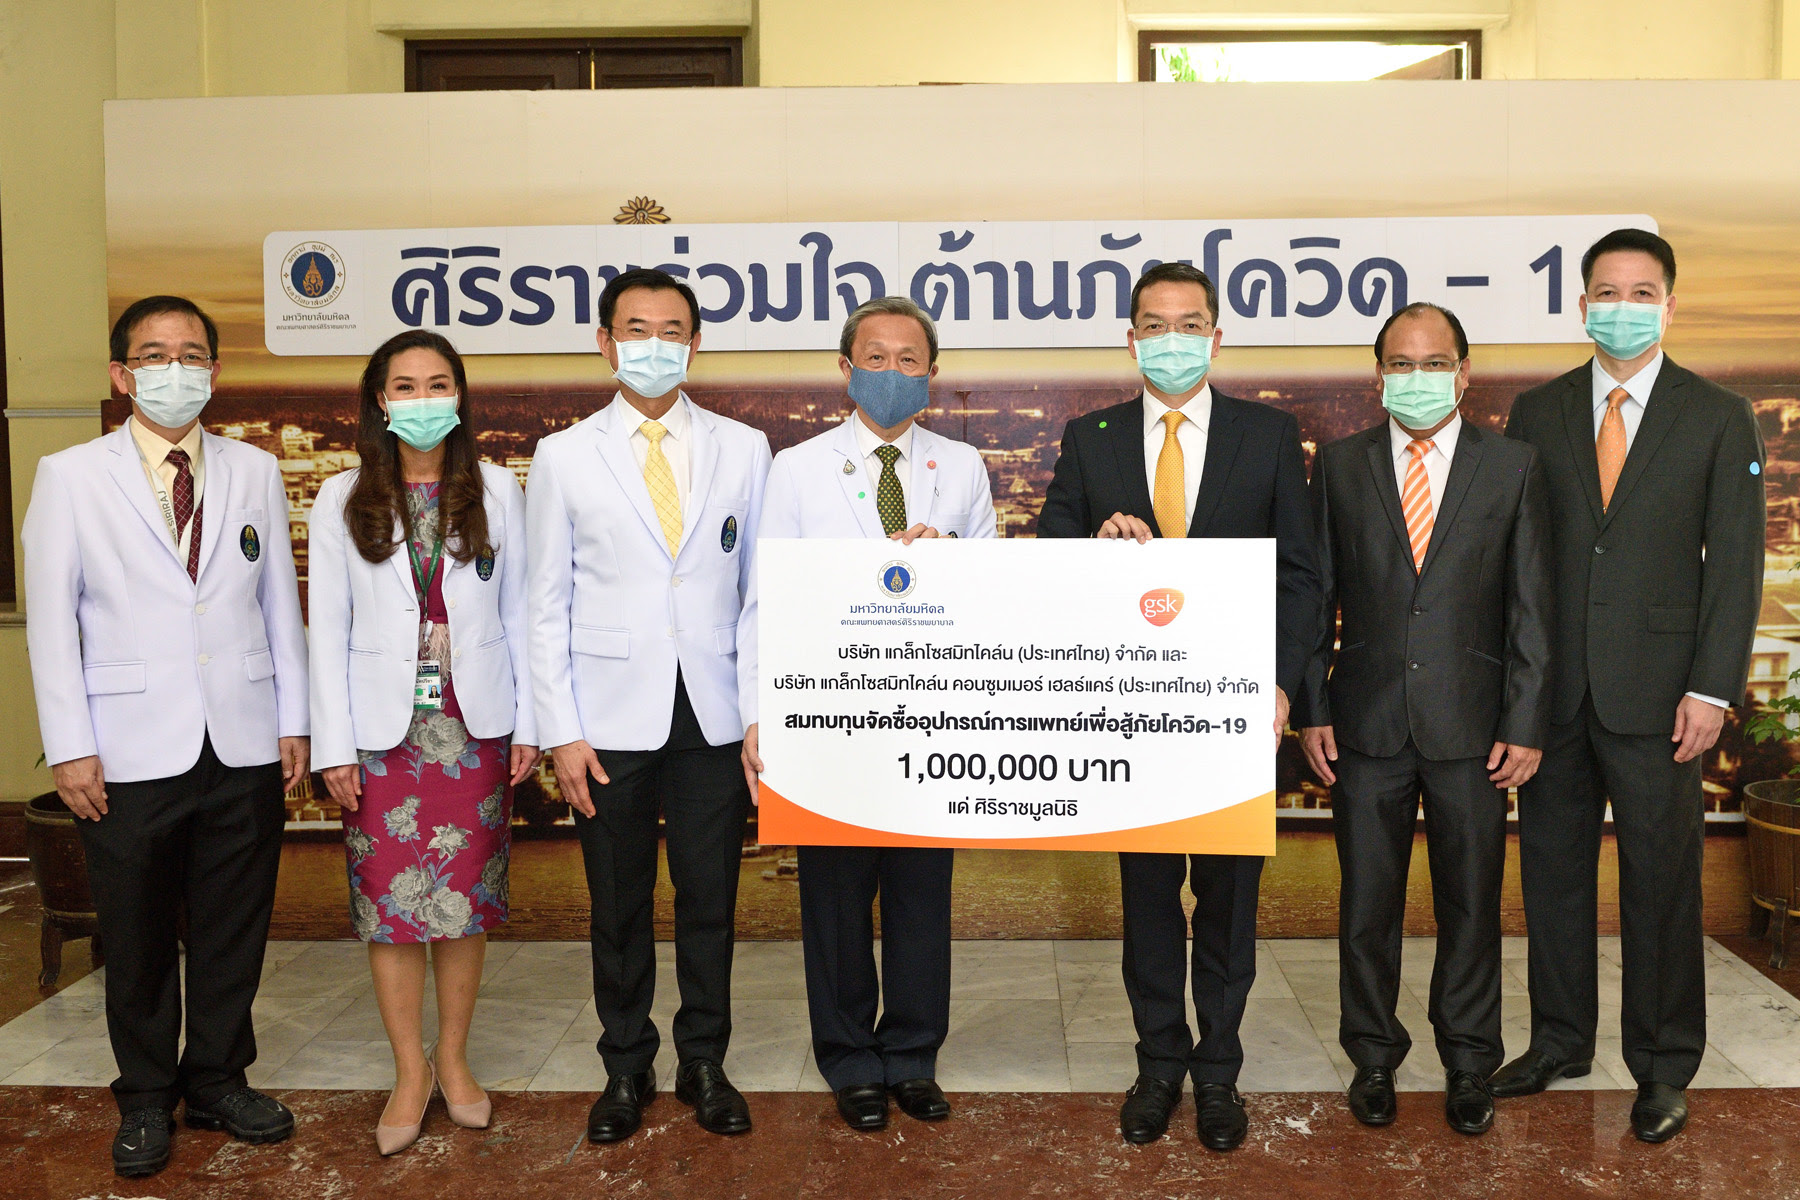 Photo Release: GSK donates one million baht to the Siriraj Foundation for medical supplies to fight against COVID-19